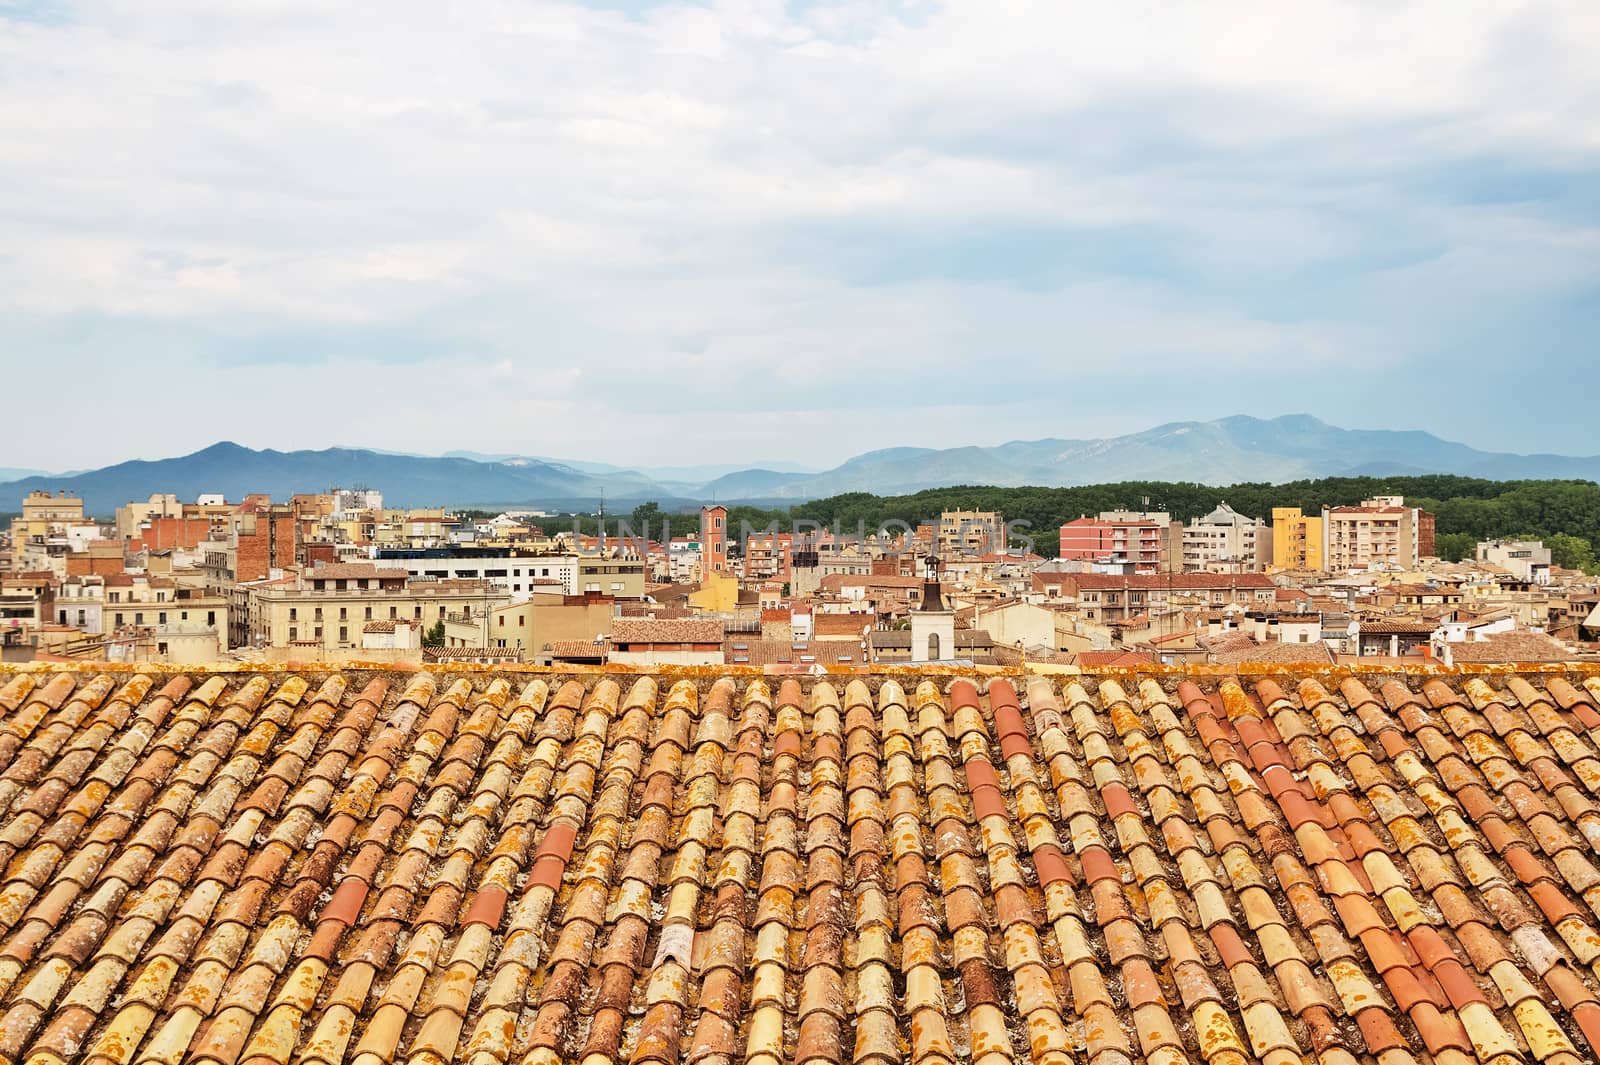 Colorful tiled rooftops of Girona. Catalonia, Spain.